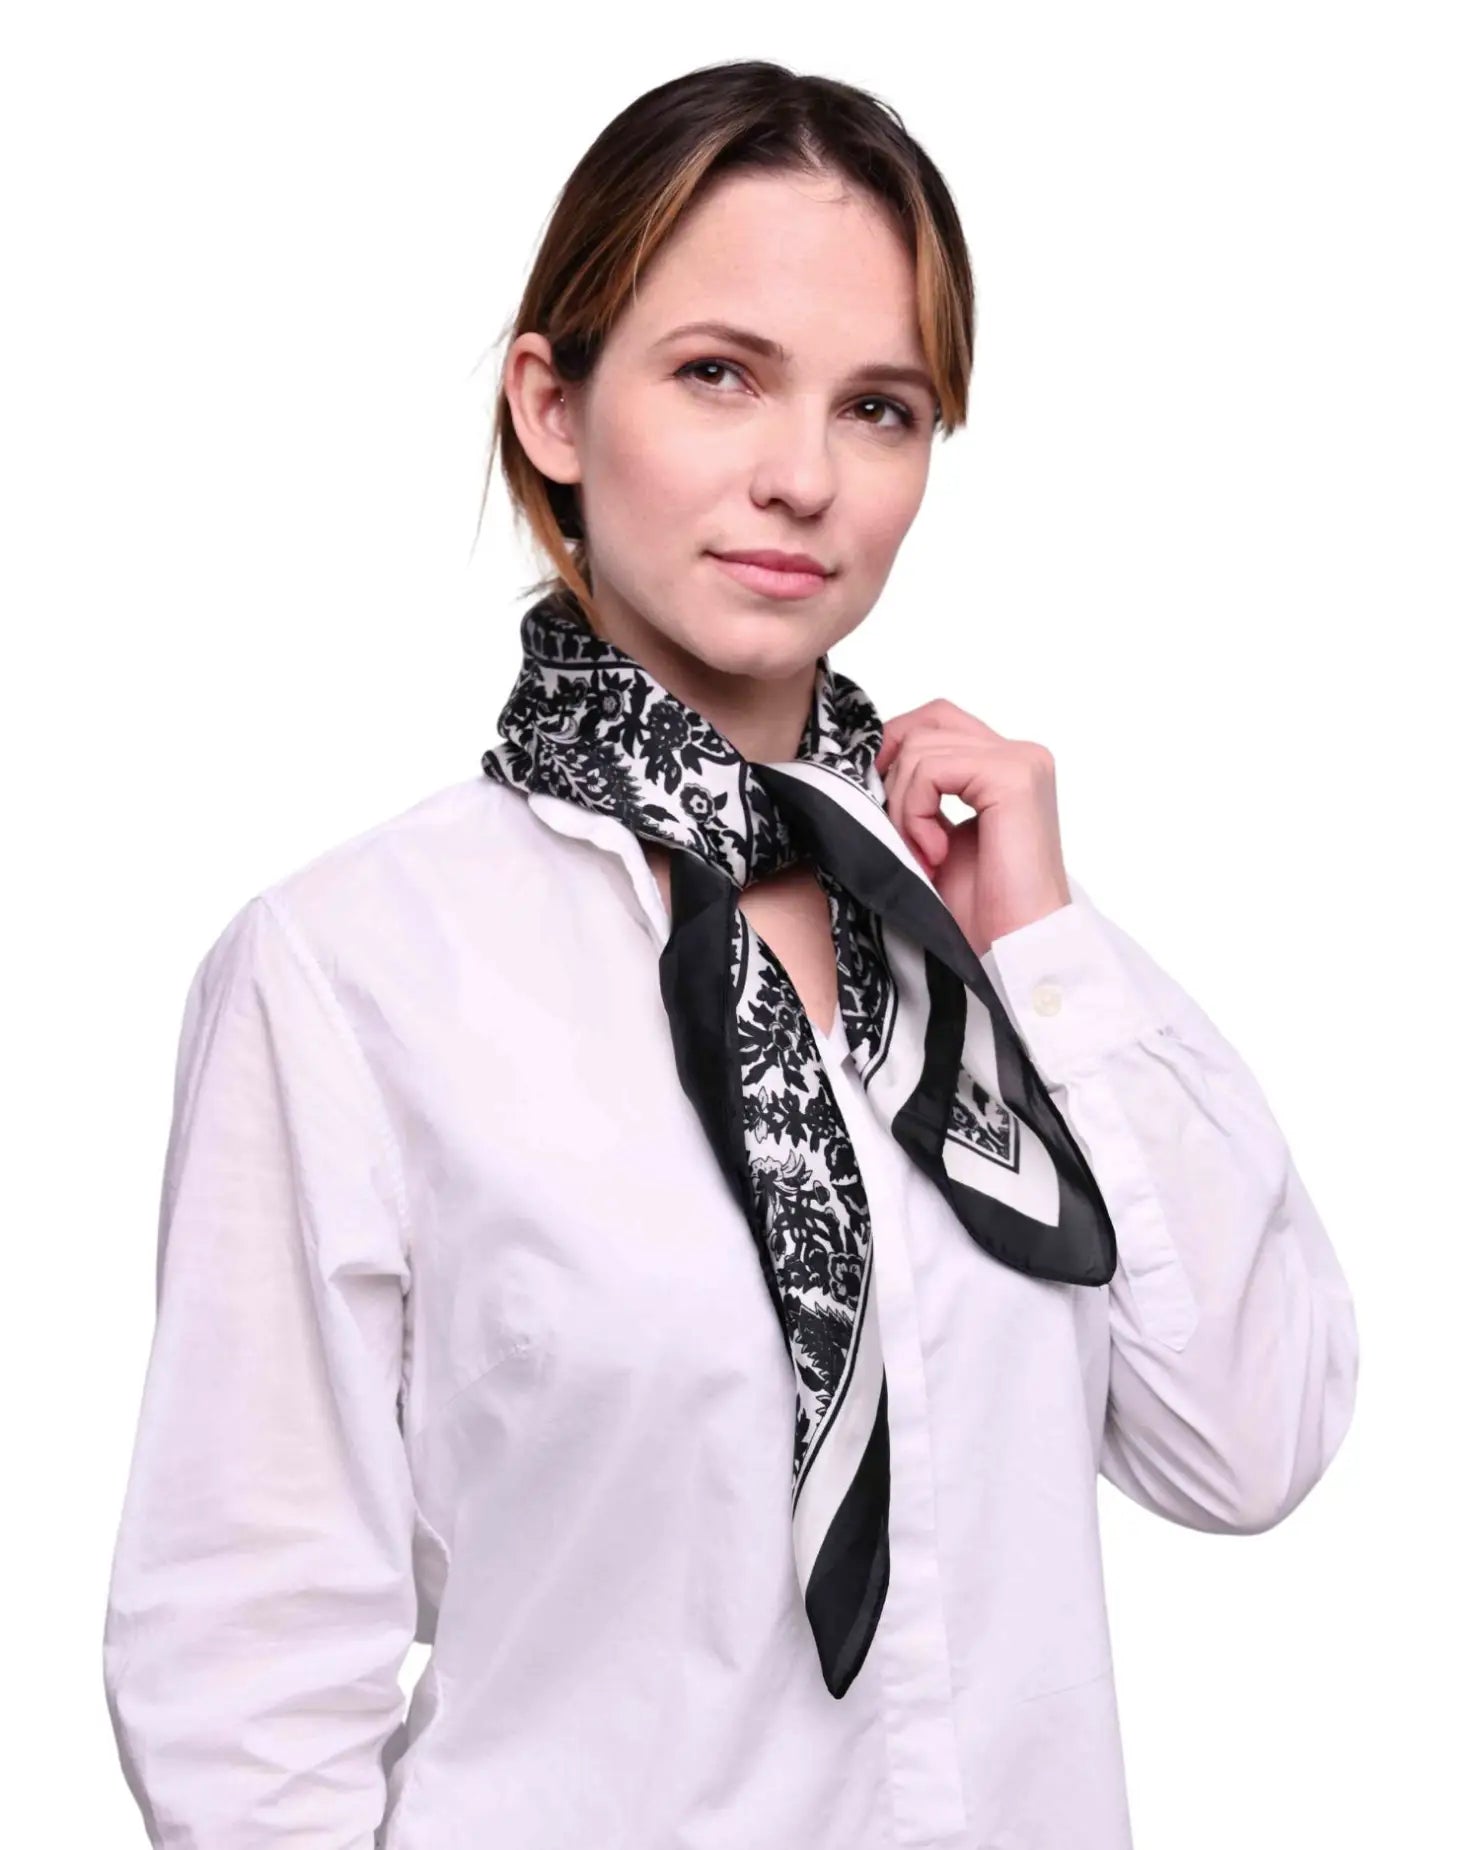 Paisley satin square scarf styled as a head wrap, worn by woman in white shirt and black scarf